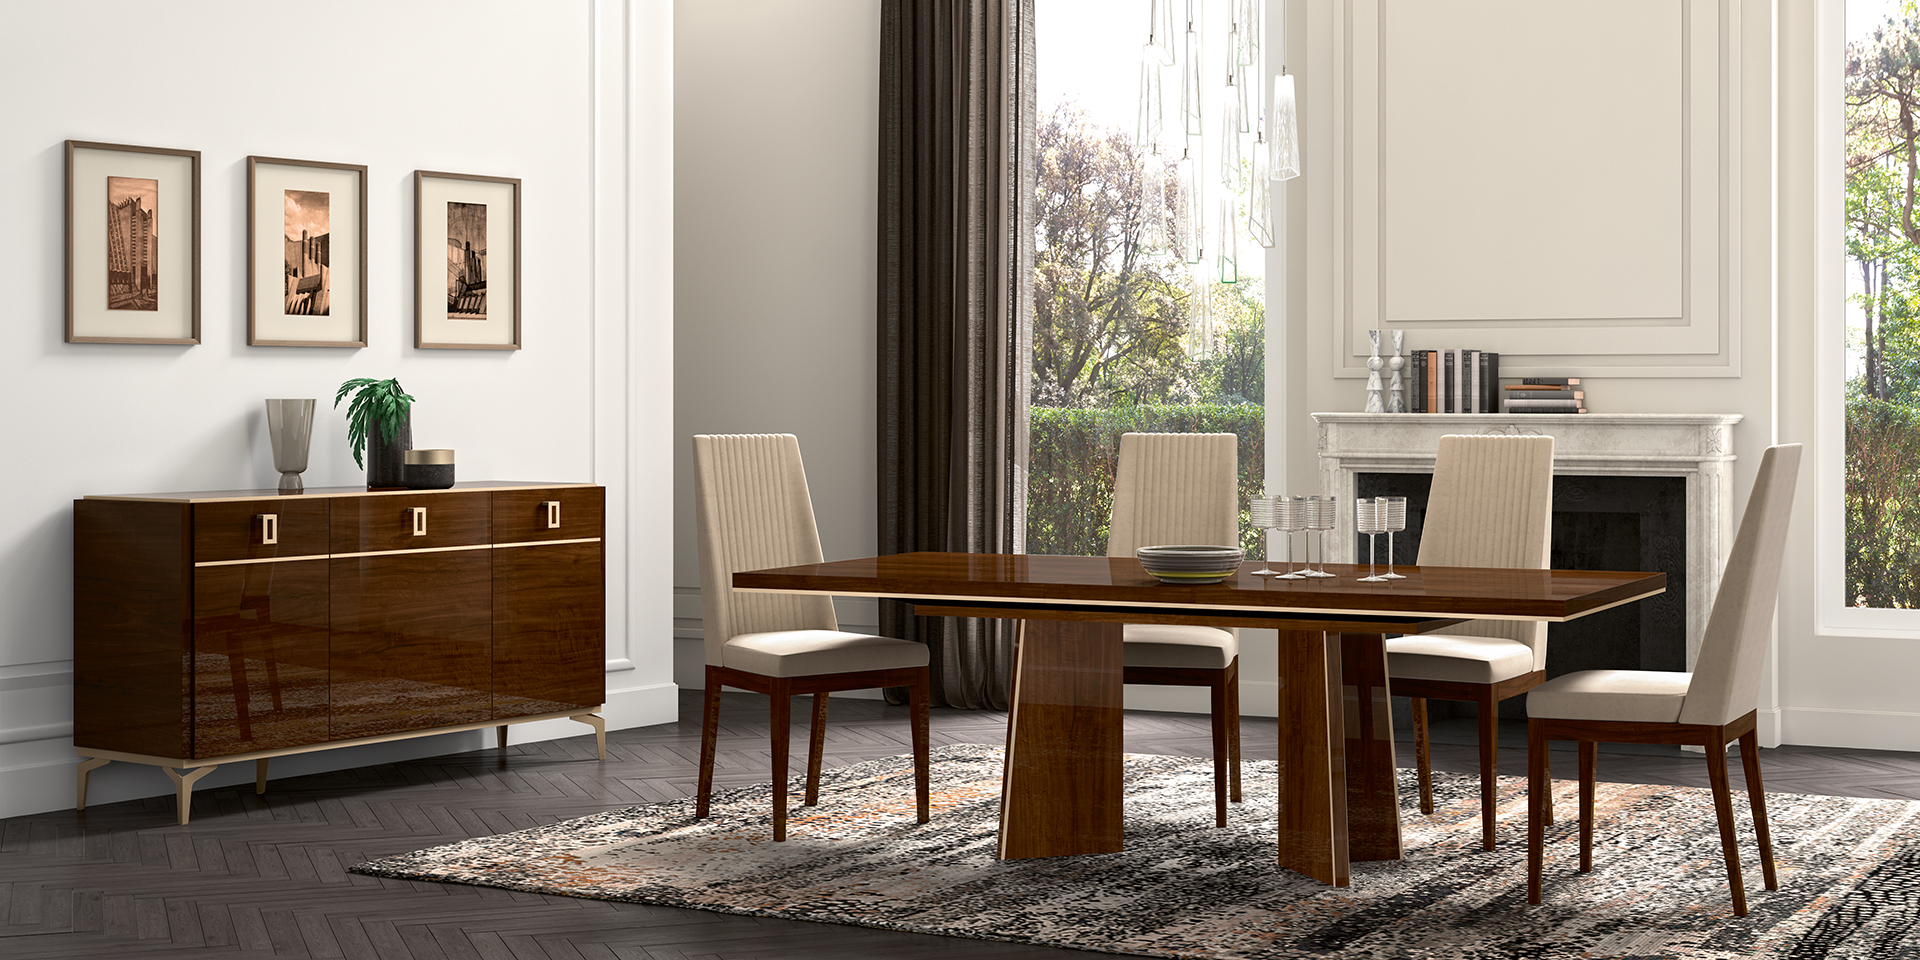 Dining Room Furniture Chairs Eva Dining Additional Items